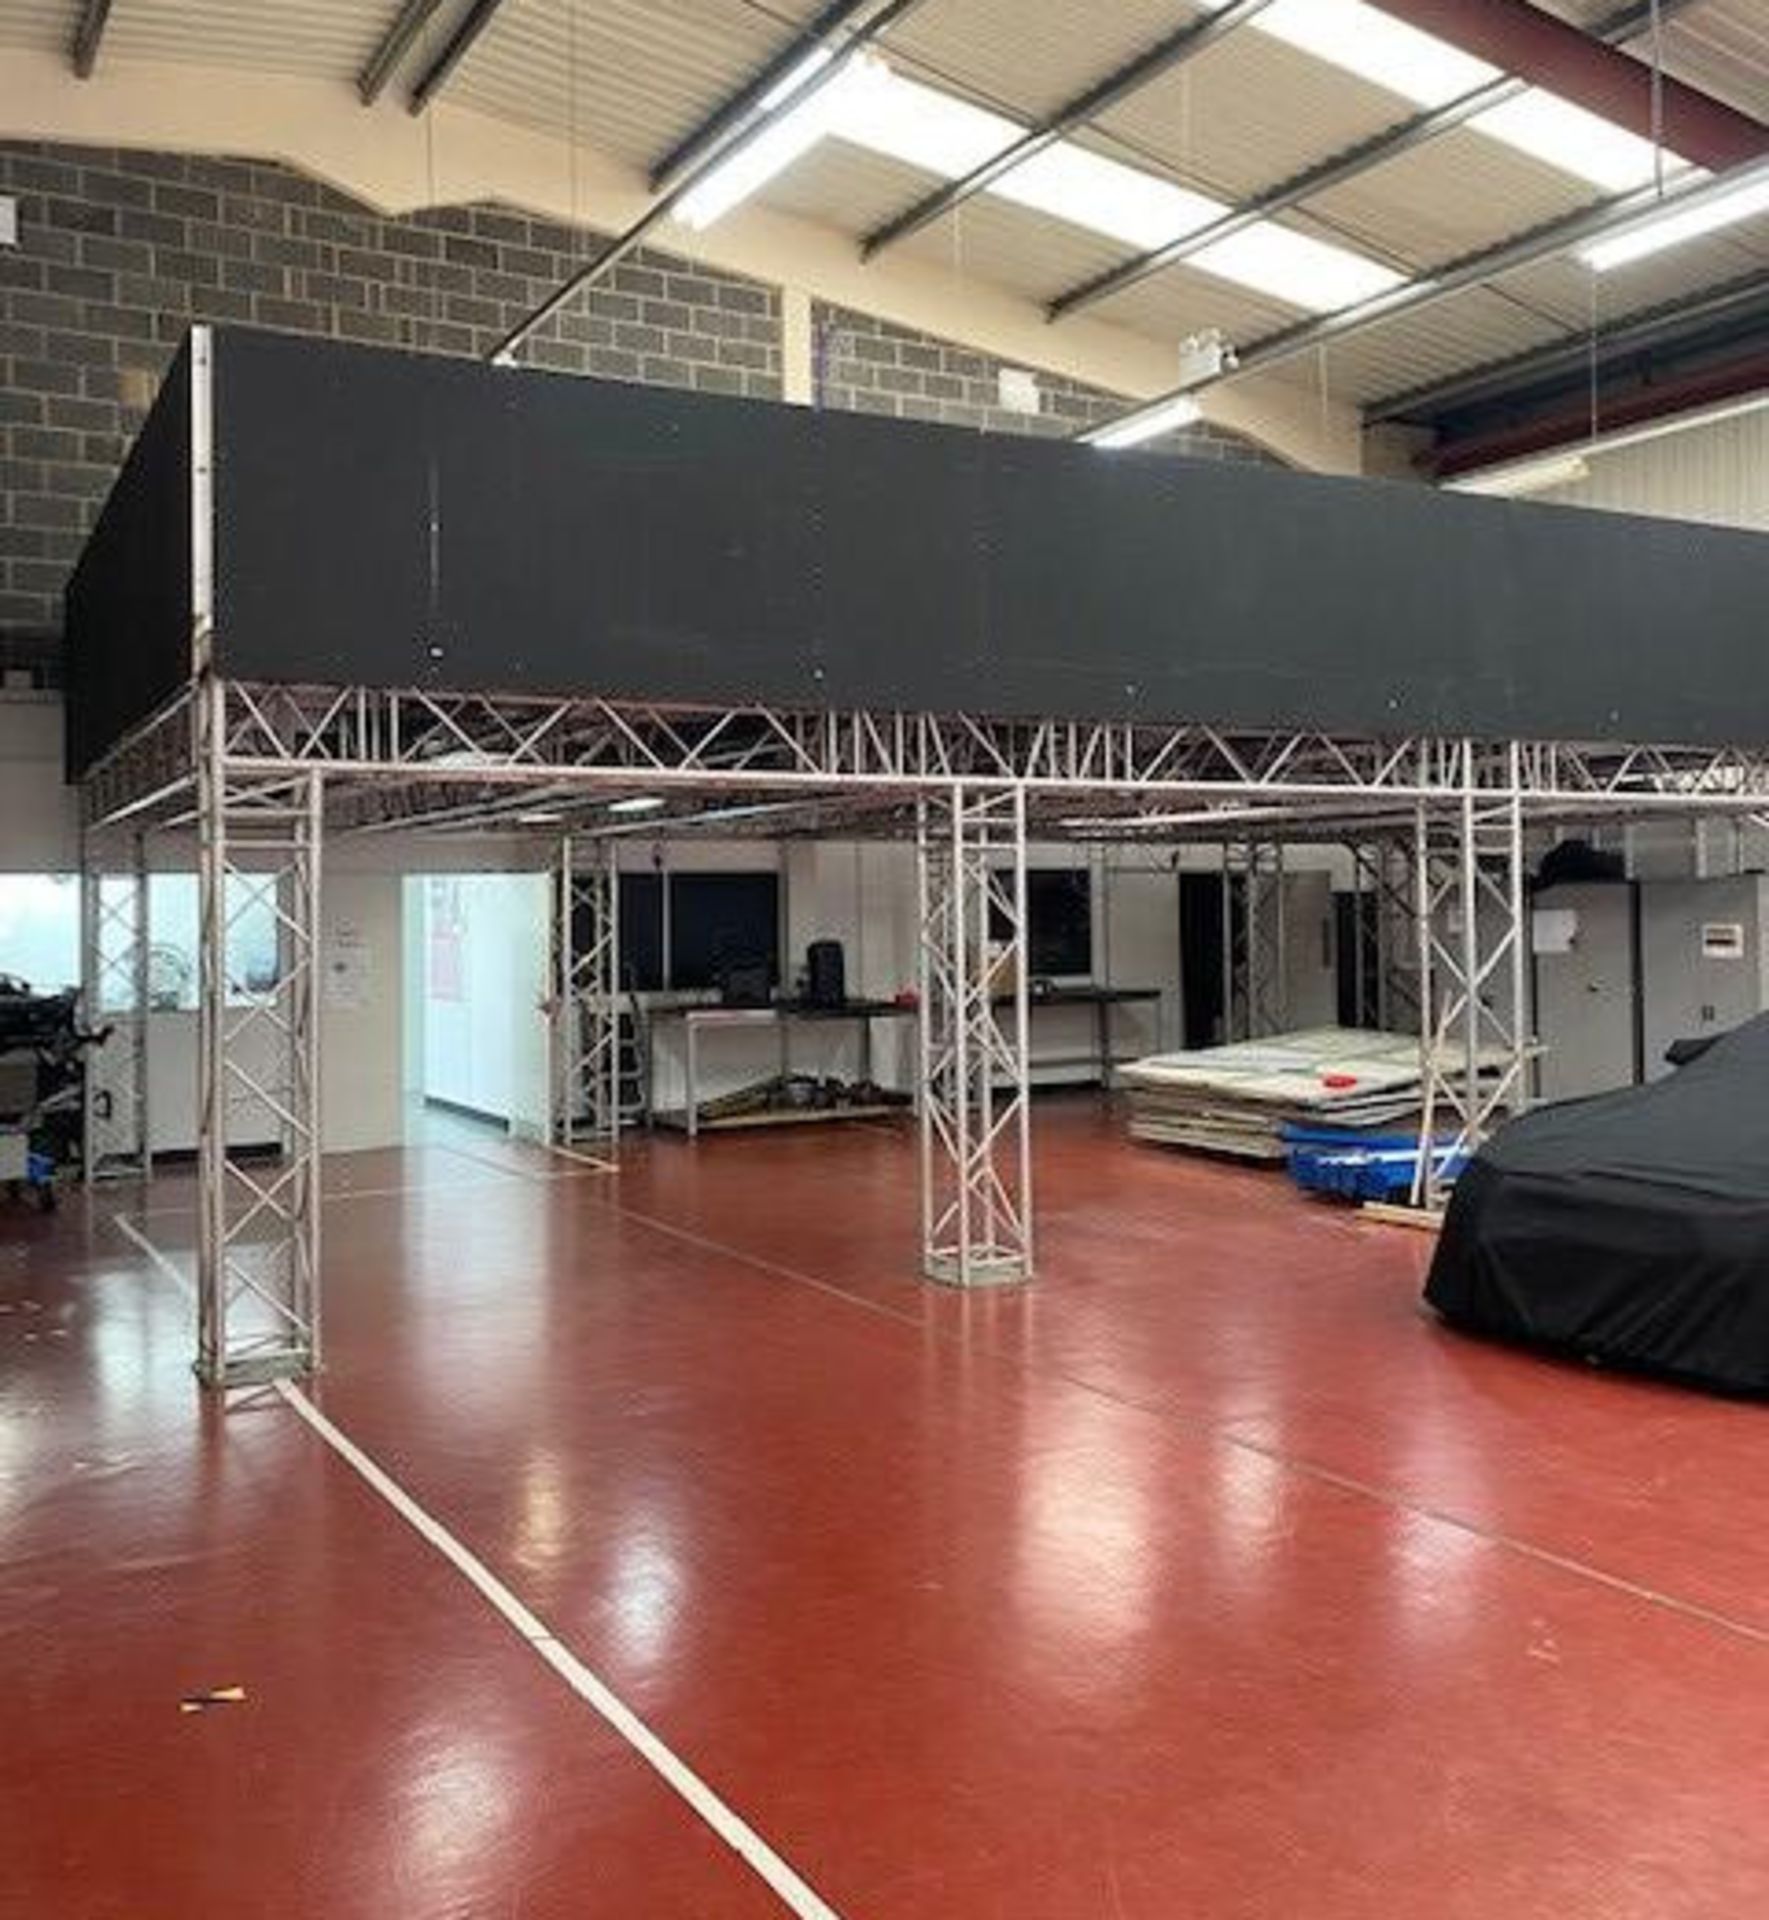 1 x 8m x 10m Truss Mezzanine with Staircase, Solid Floor And Ballustrade- CL548 - Location: Near - Image 3 of 10